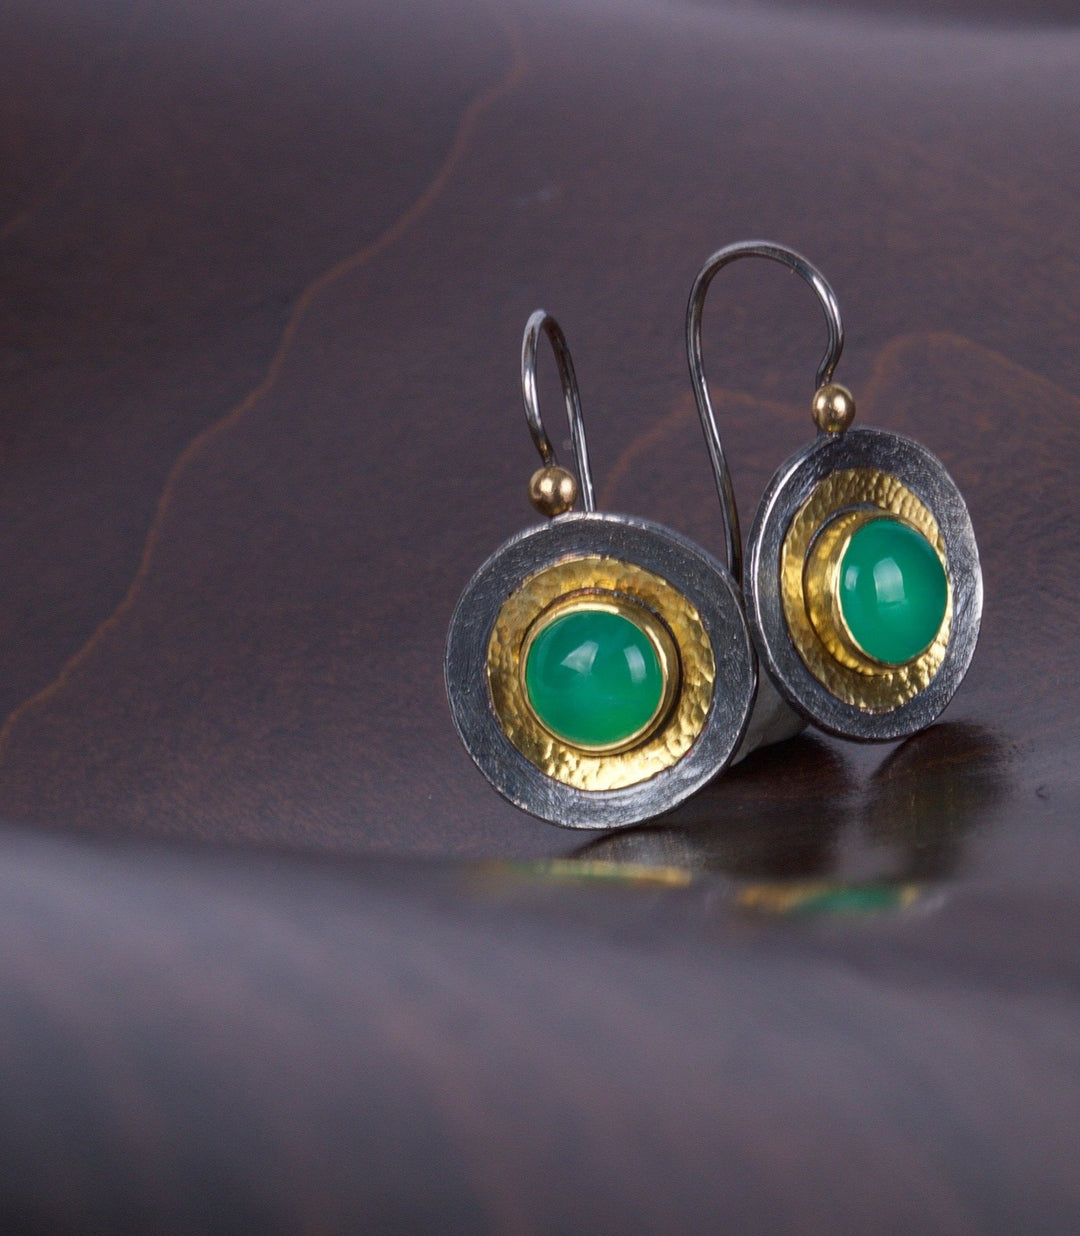 Chrysoprase and Oxidized Silver Earrings 05191 - Ormachea Jewelry